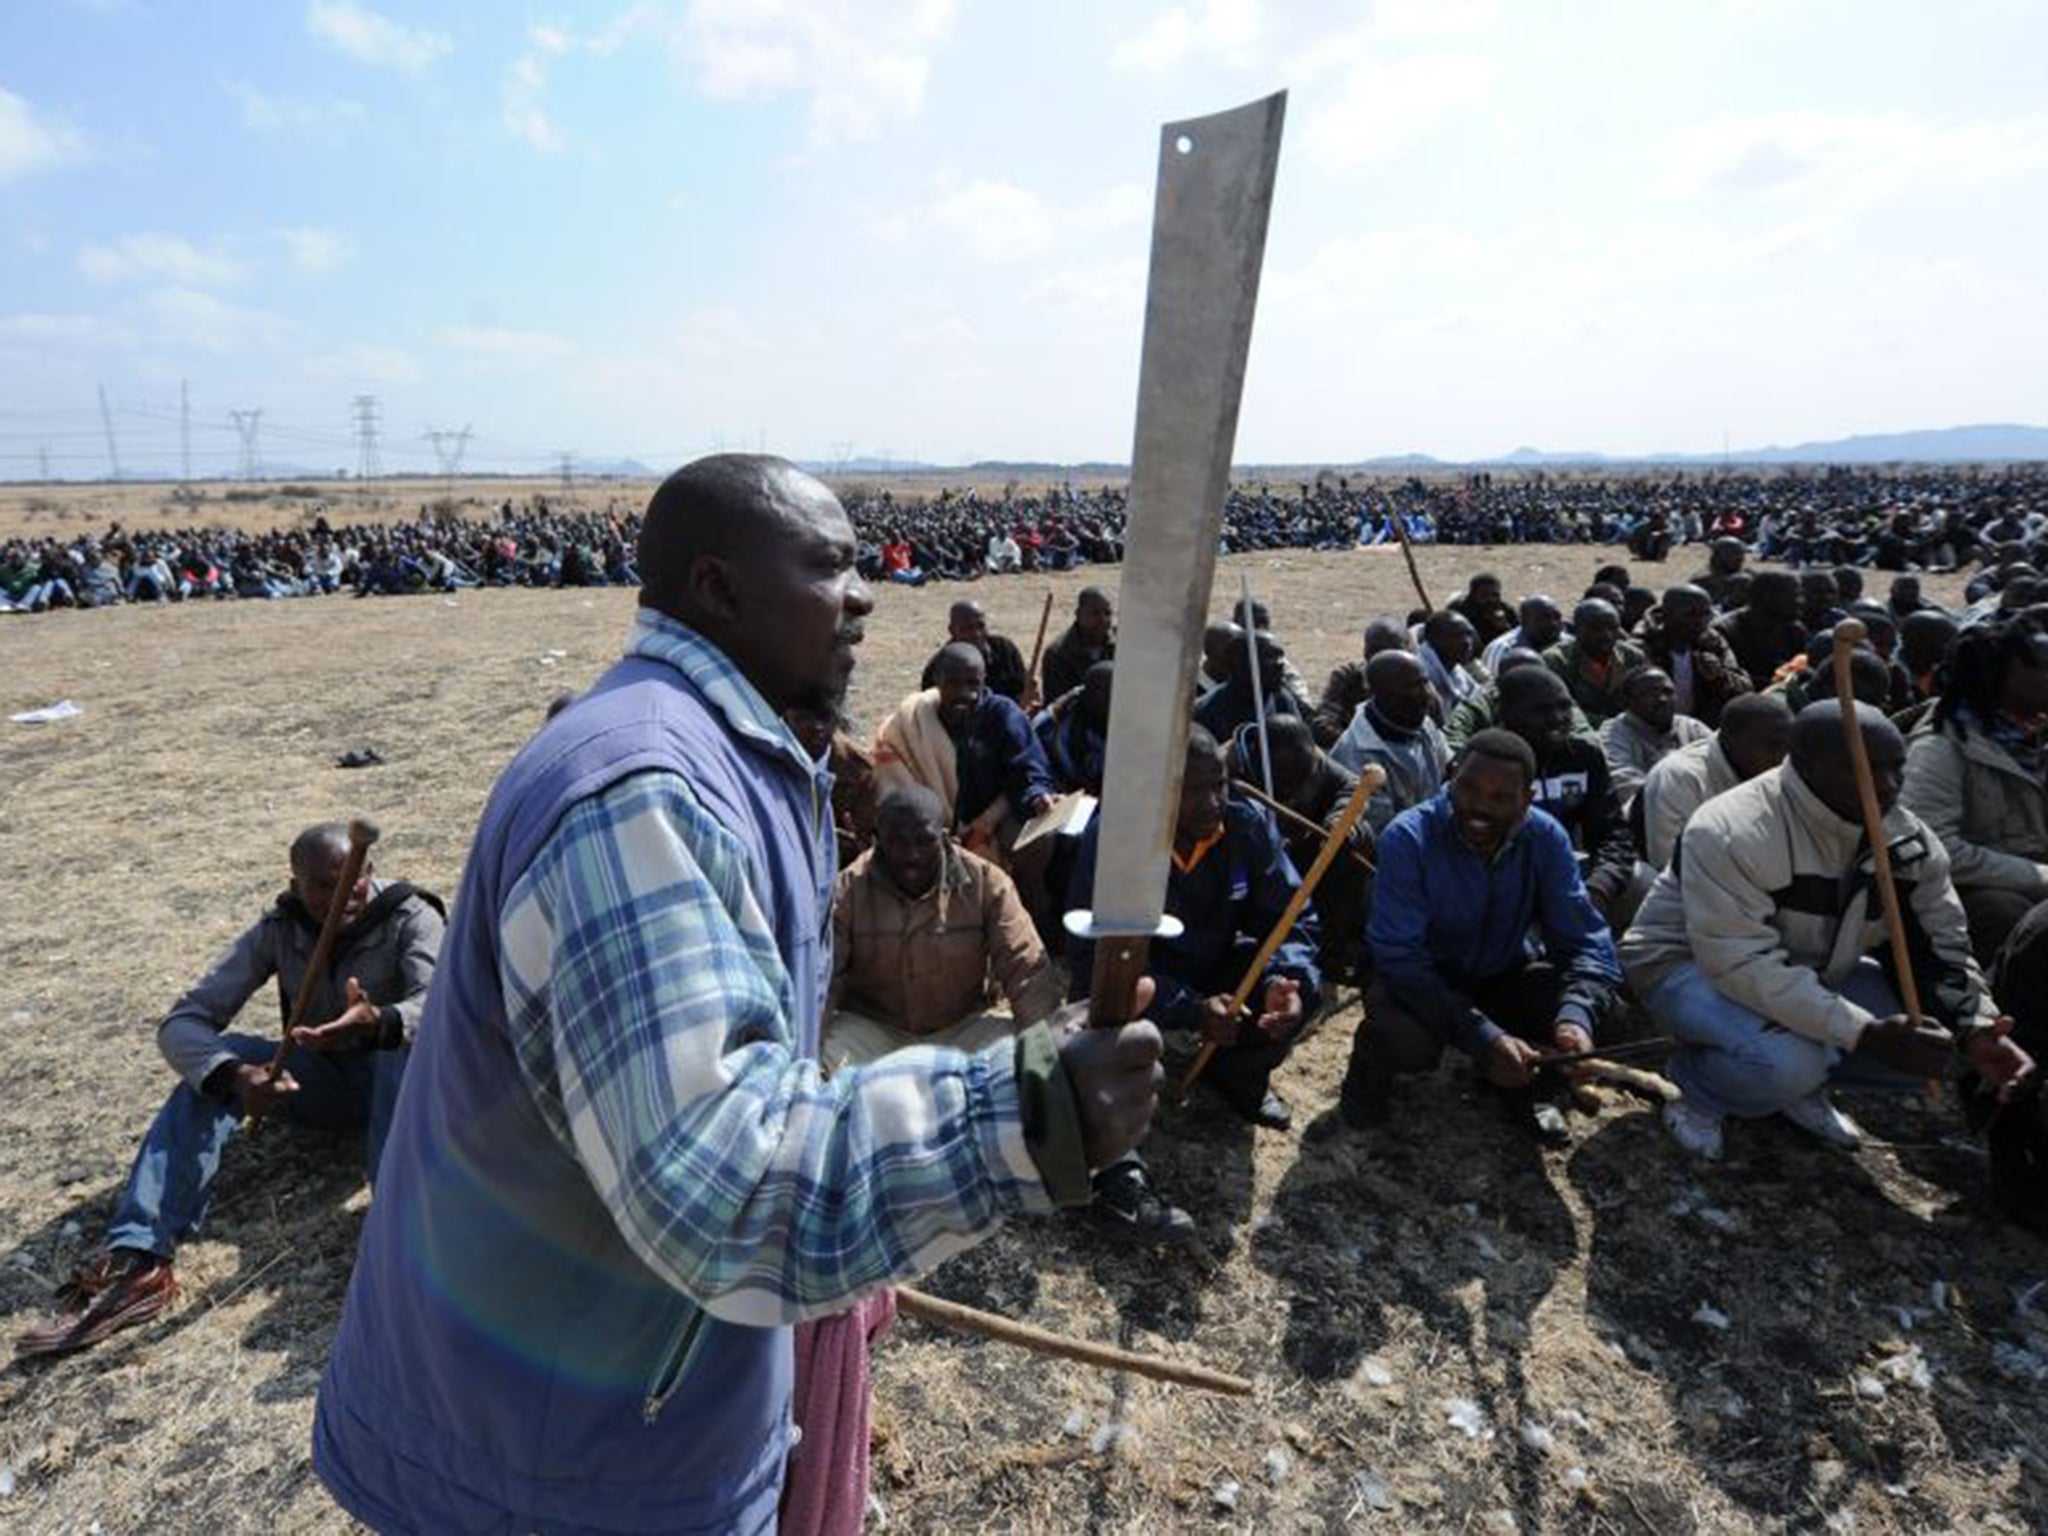 The workers were shot dead during their sit-in protest at the Marikana mine in 2012